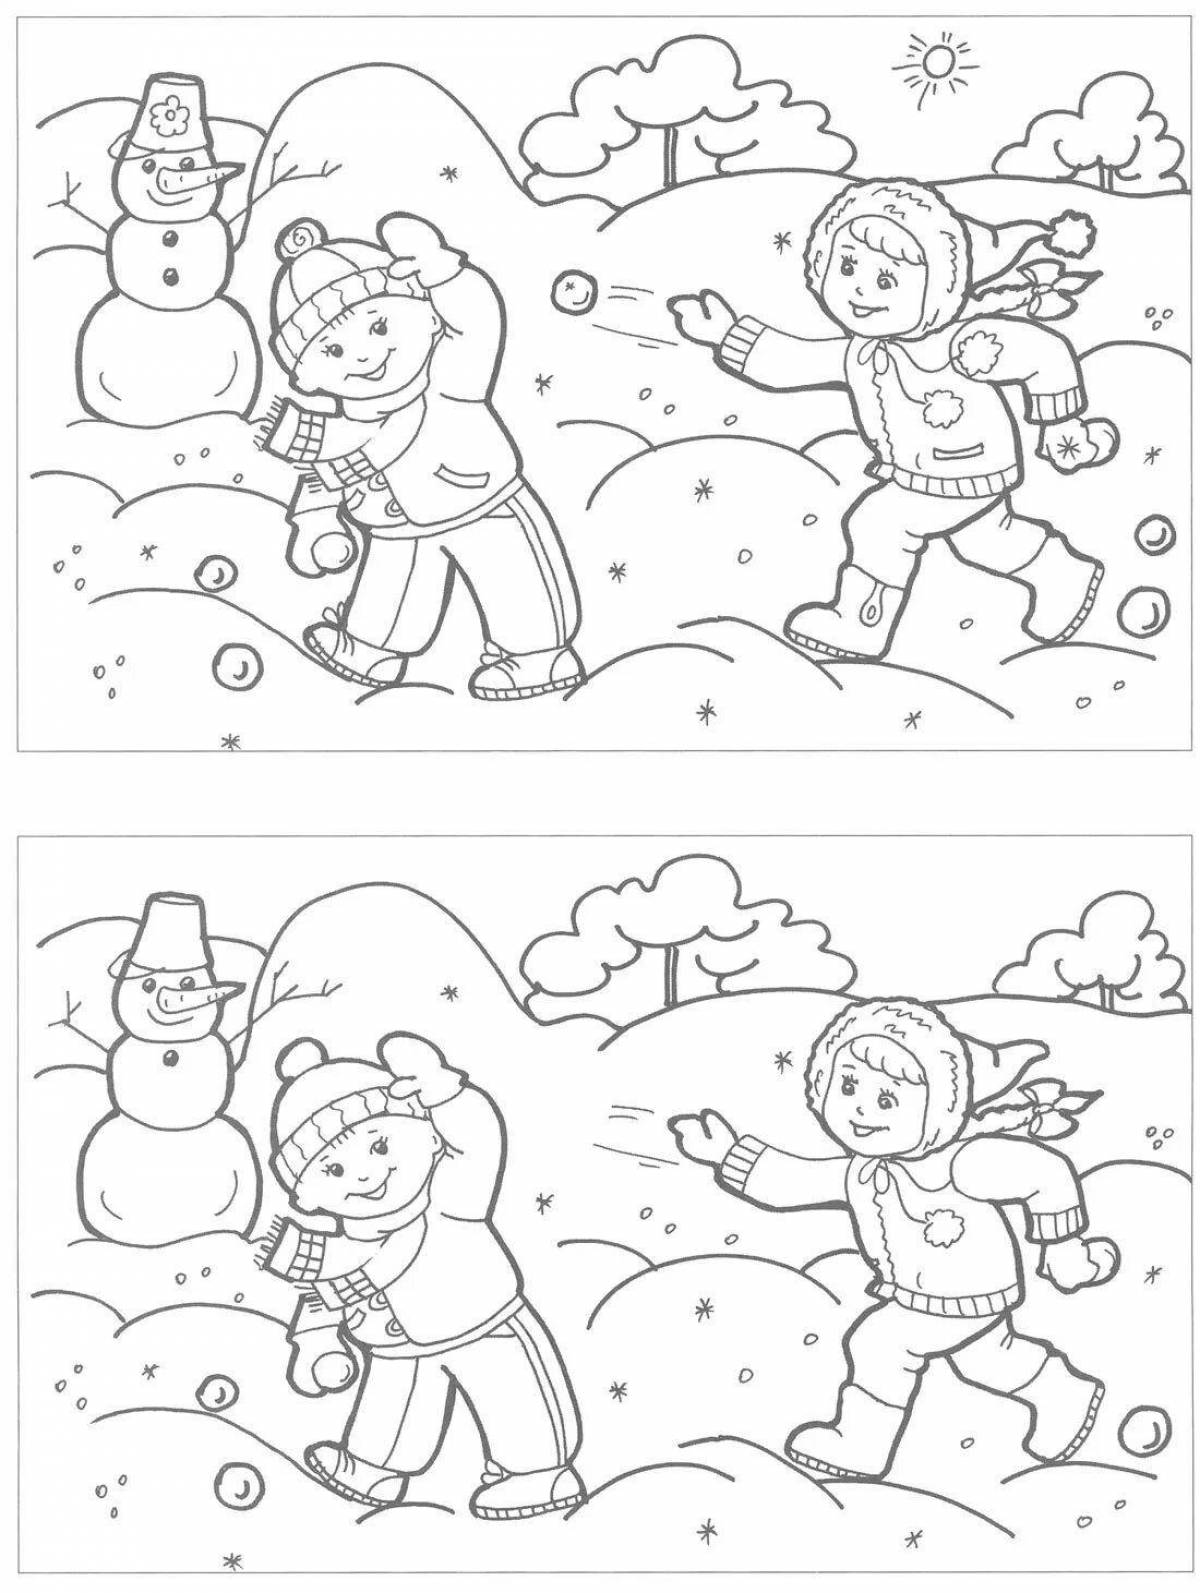 Entertaining coloring winter games